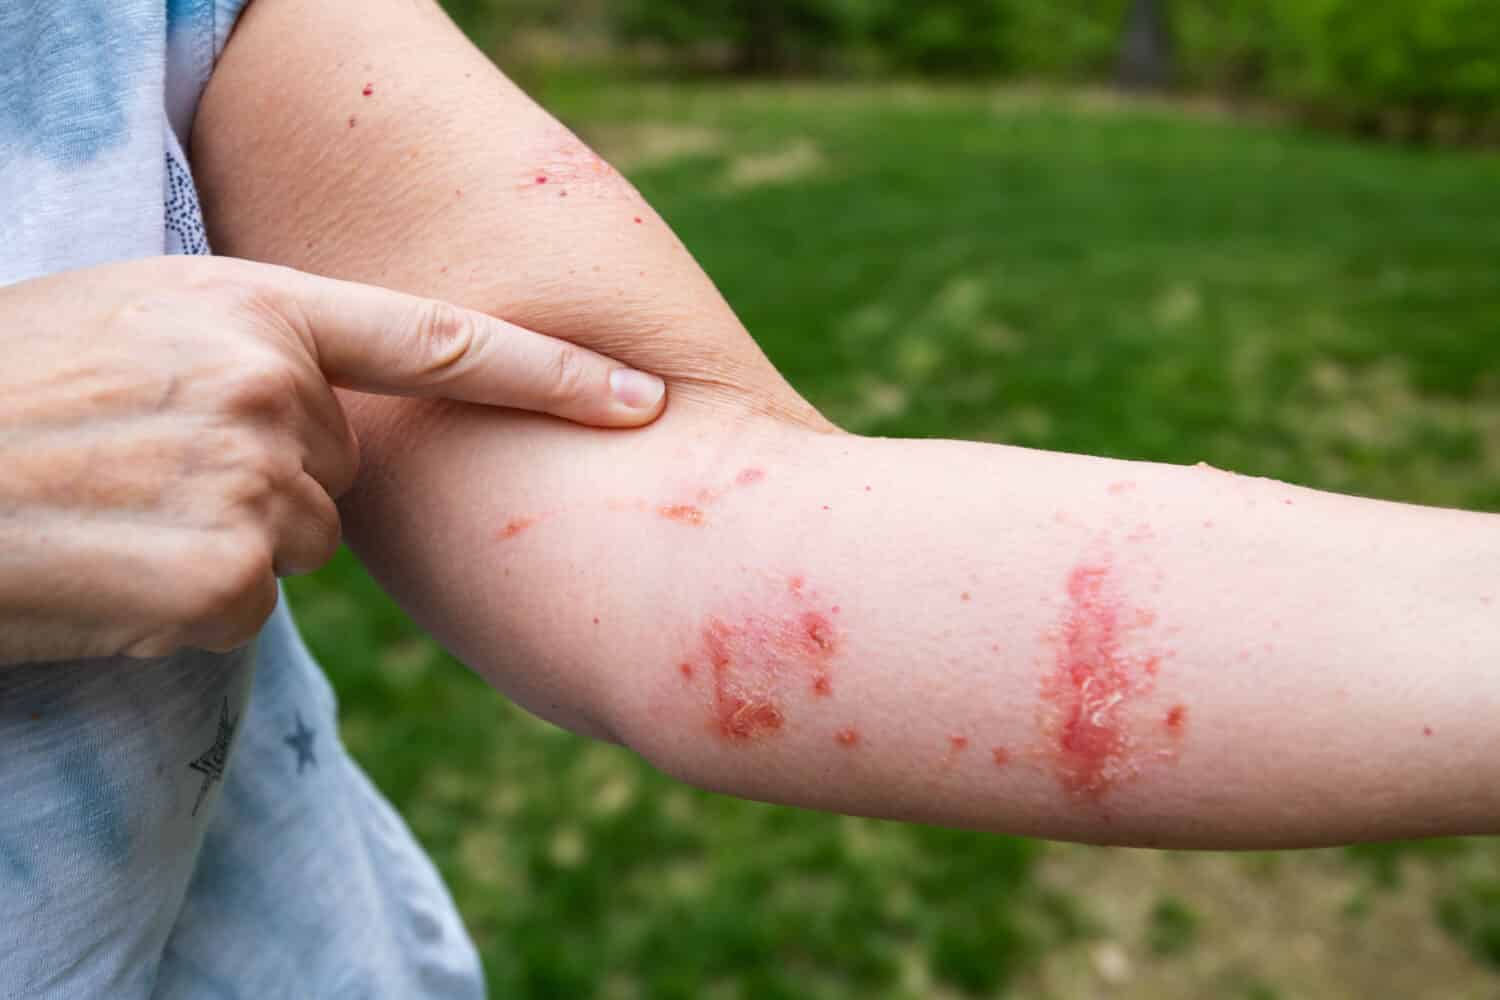 Pointing at itchy poison ivy / poison oak rash and infection with blisters and oozing